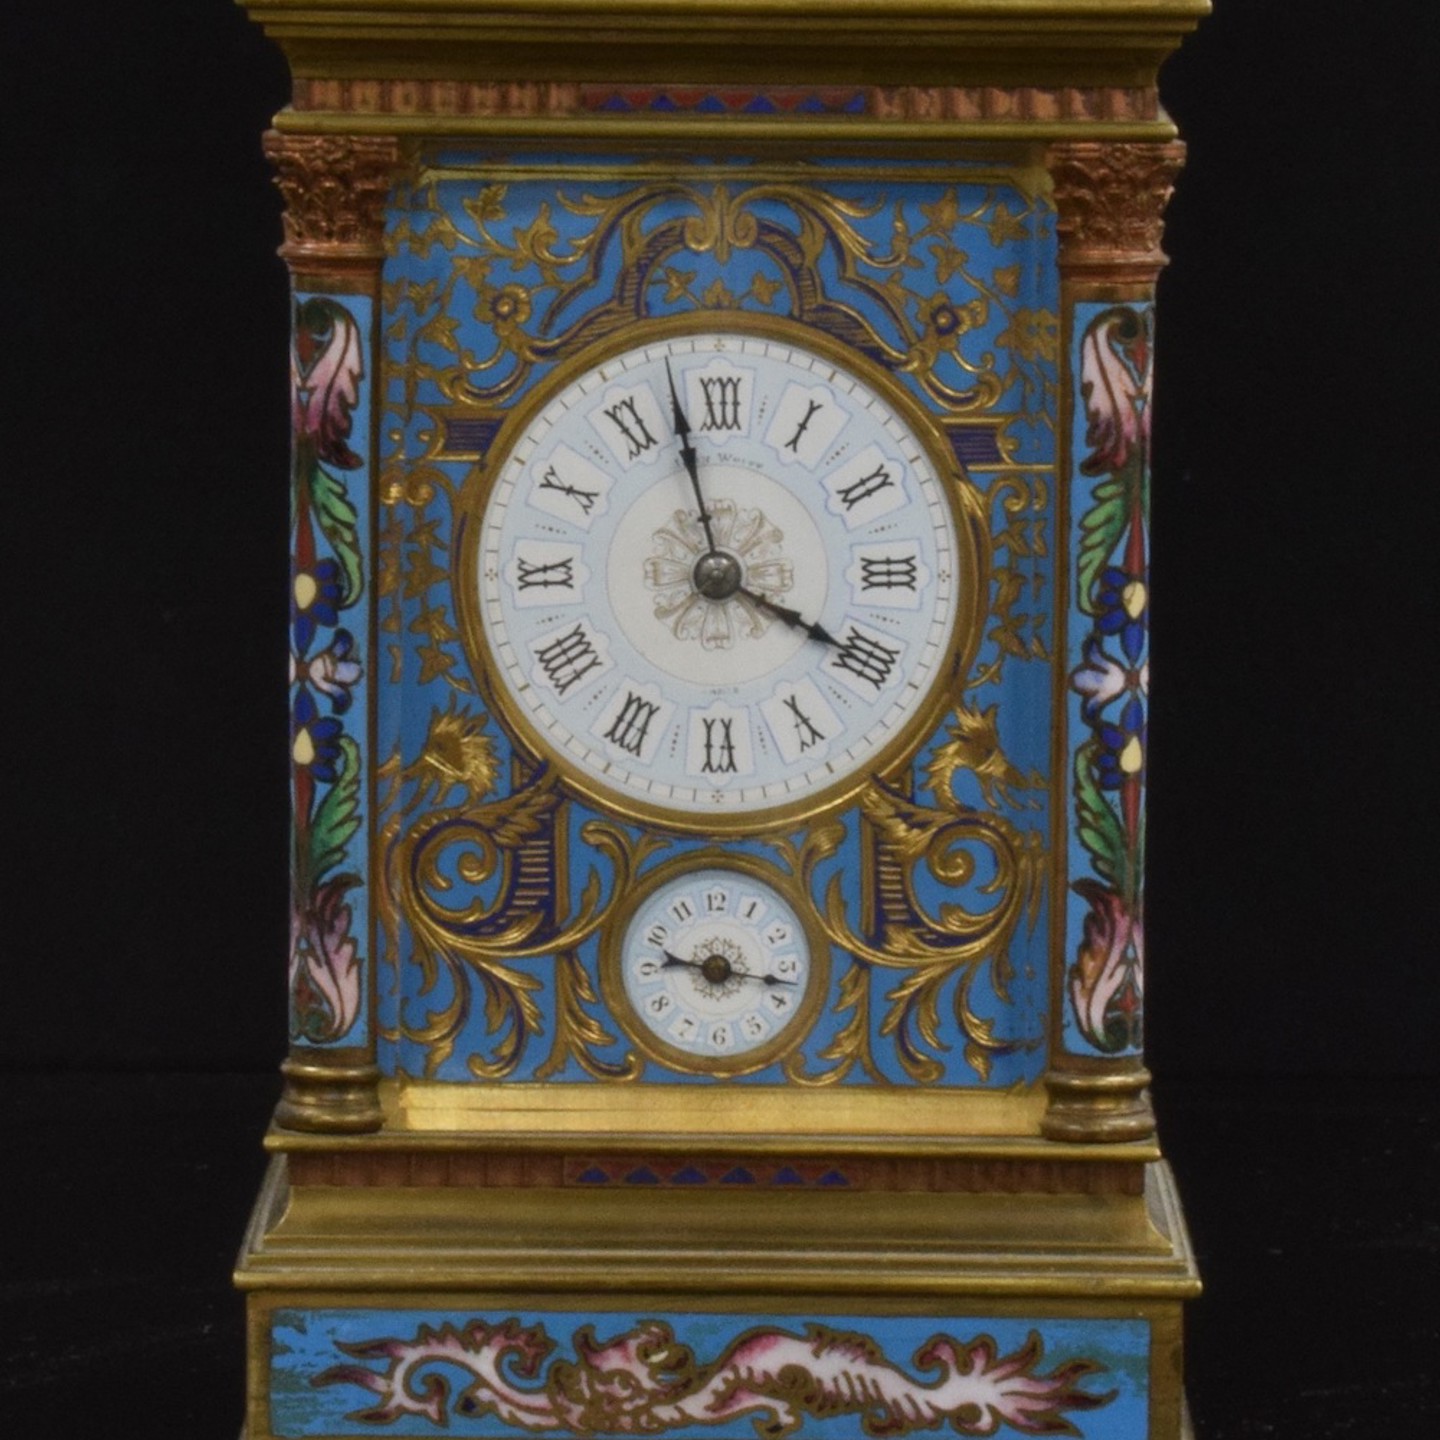 John White Of Paris Champlevé Enamel Gilt Cased Repeating Carriage Clock Sold £3,400